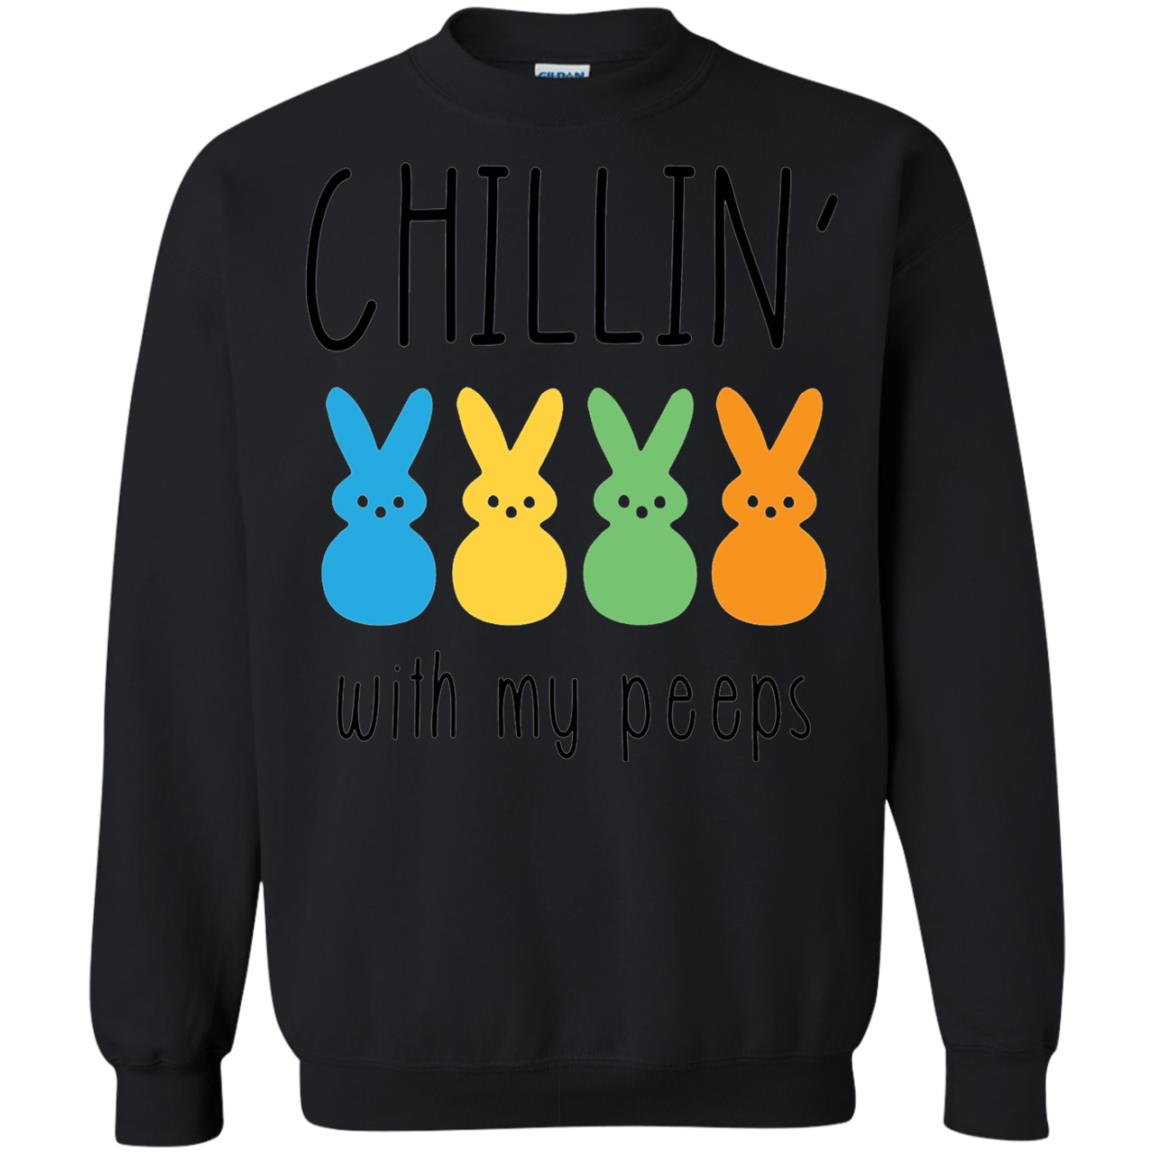 Chillin With My Peeps Happy Easter  T-shirt